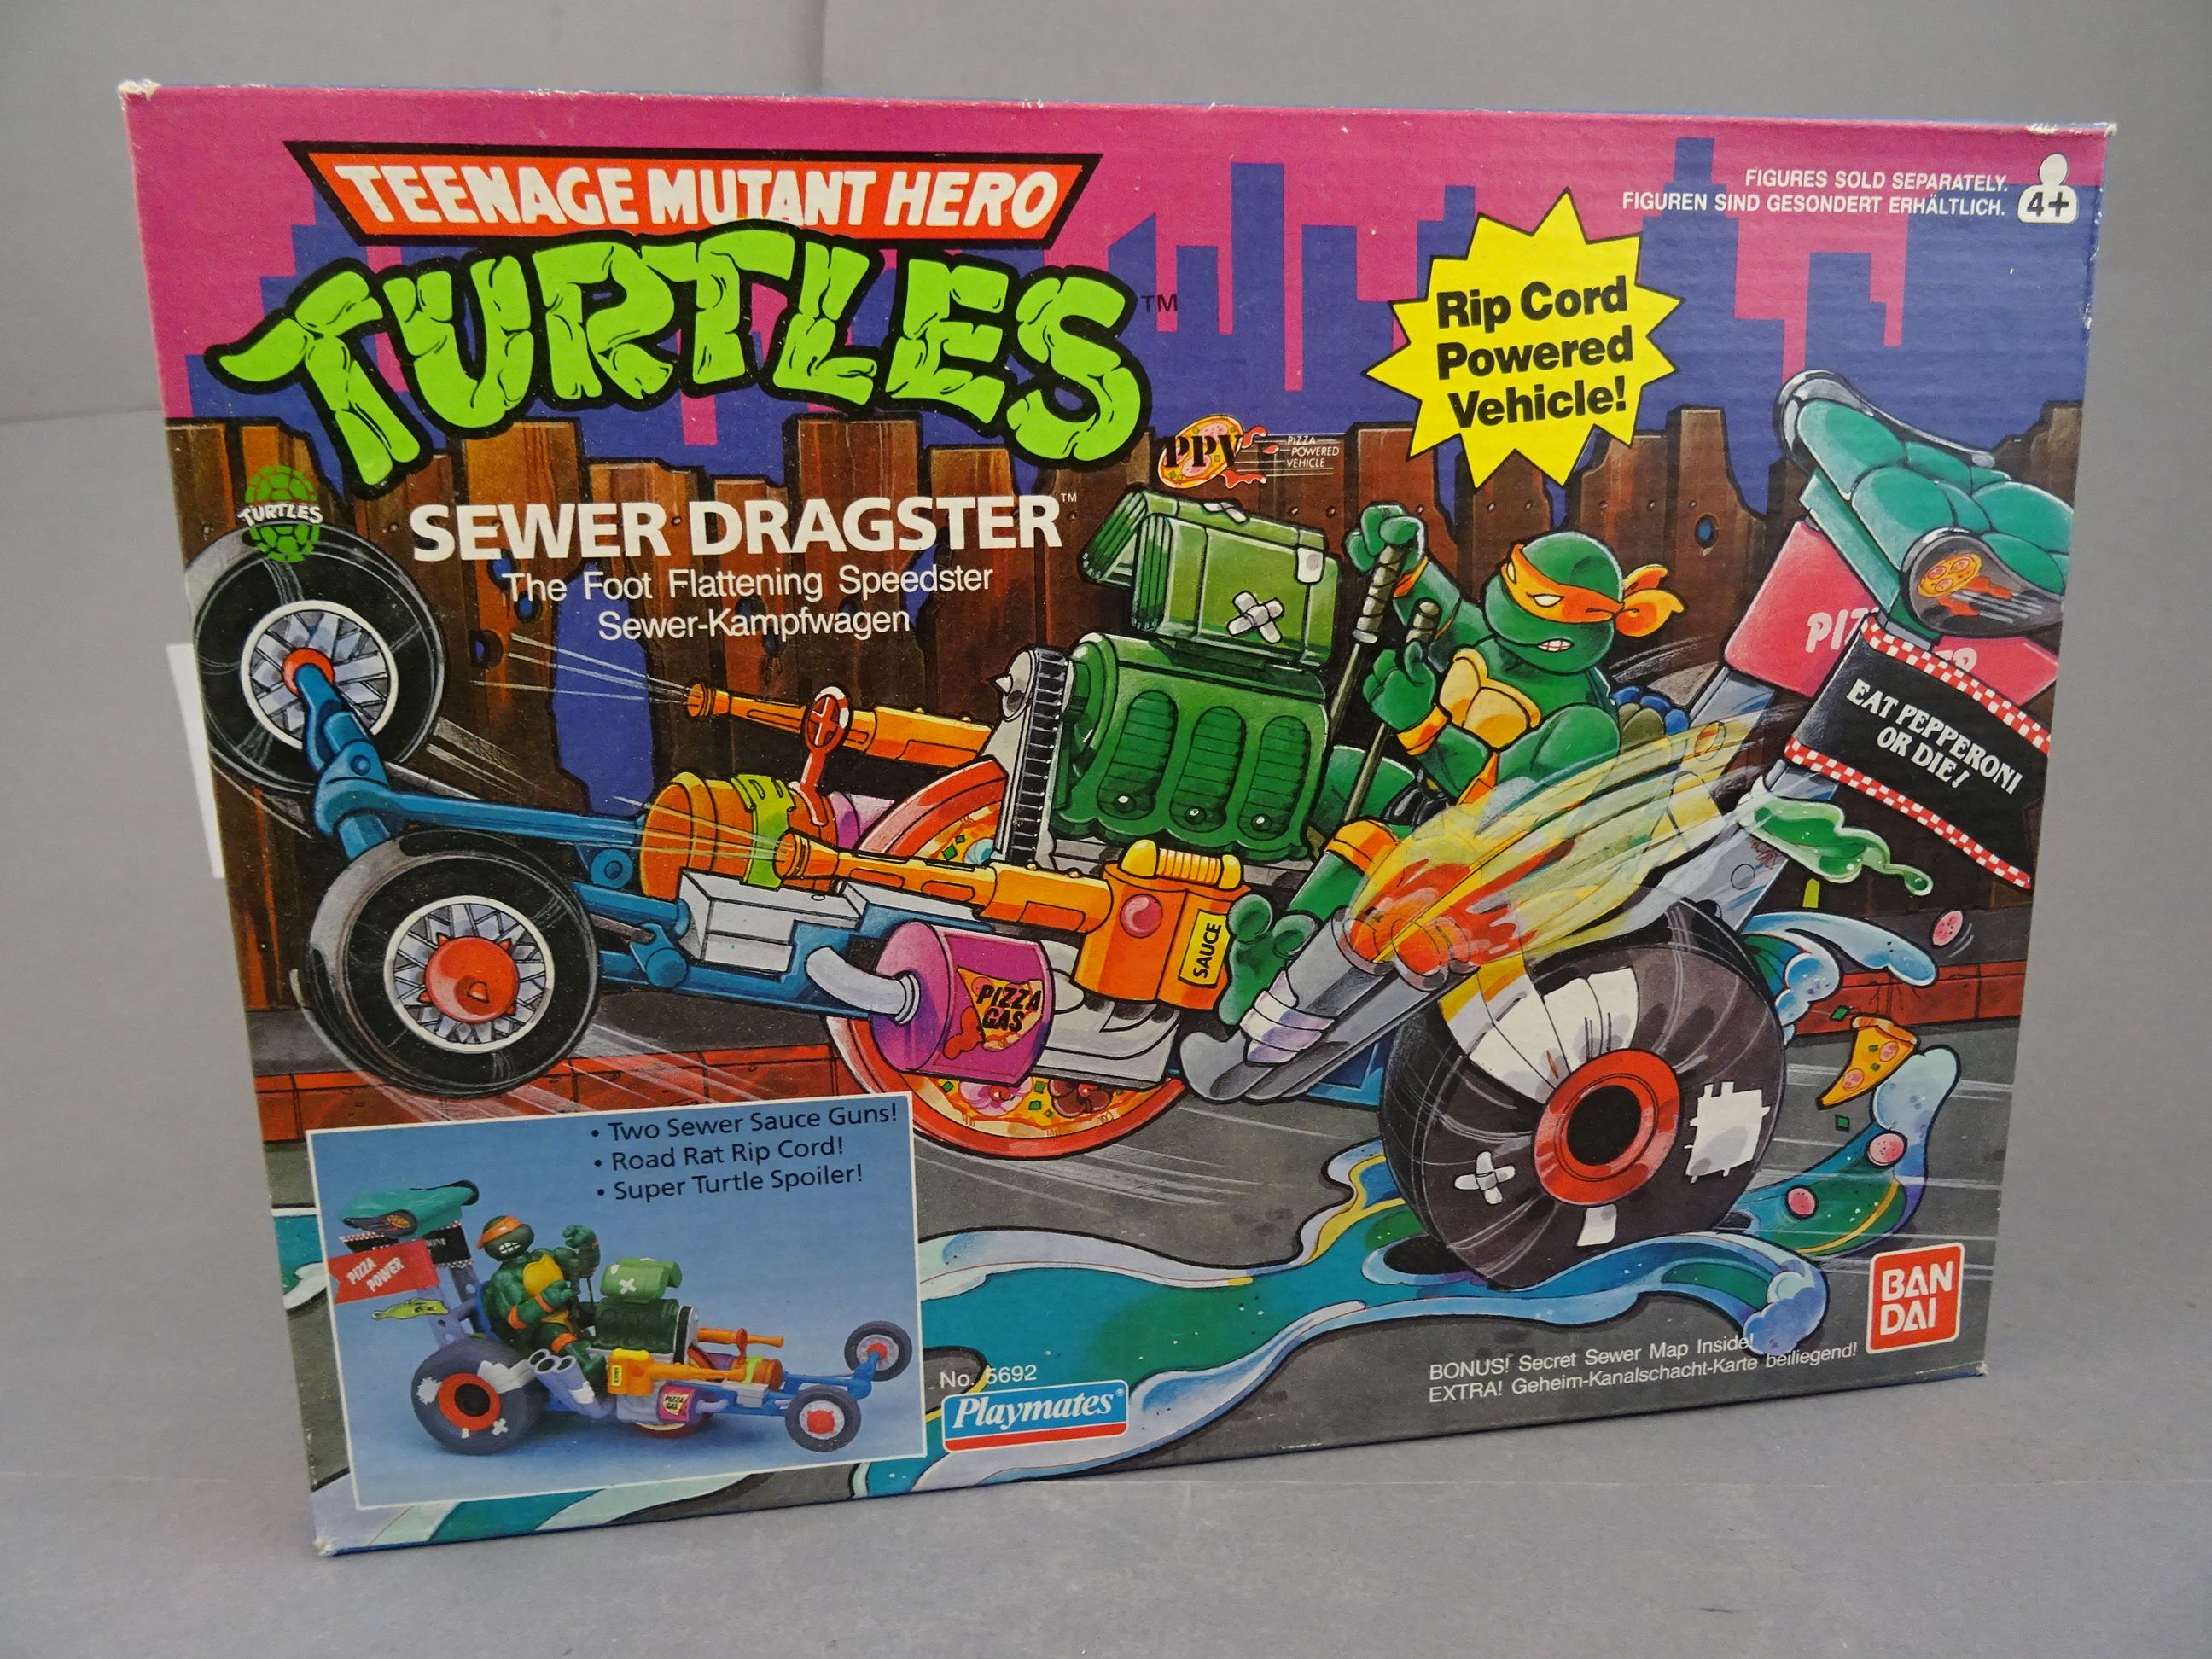 Original boxed Playmates Bandai Teenage Mutant Hero Turtles Sewer Dragster vehicle, appears to be